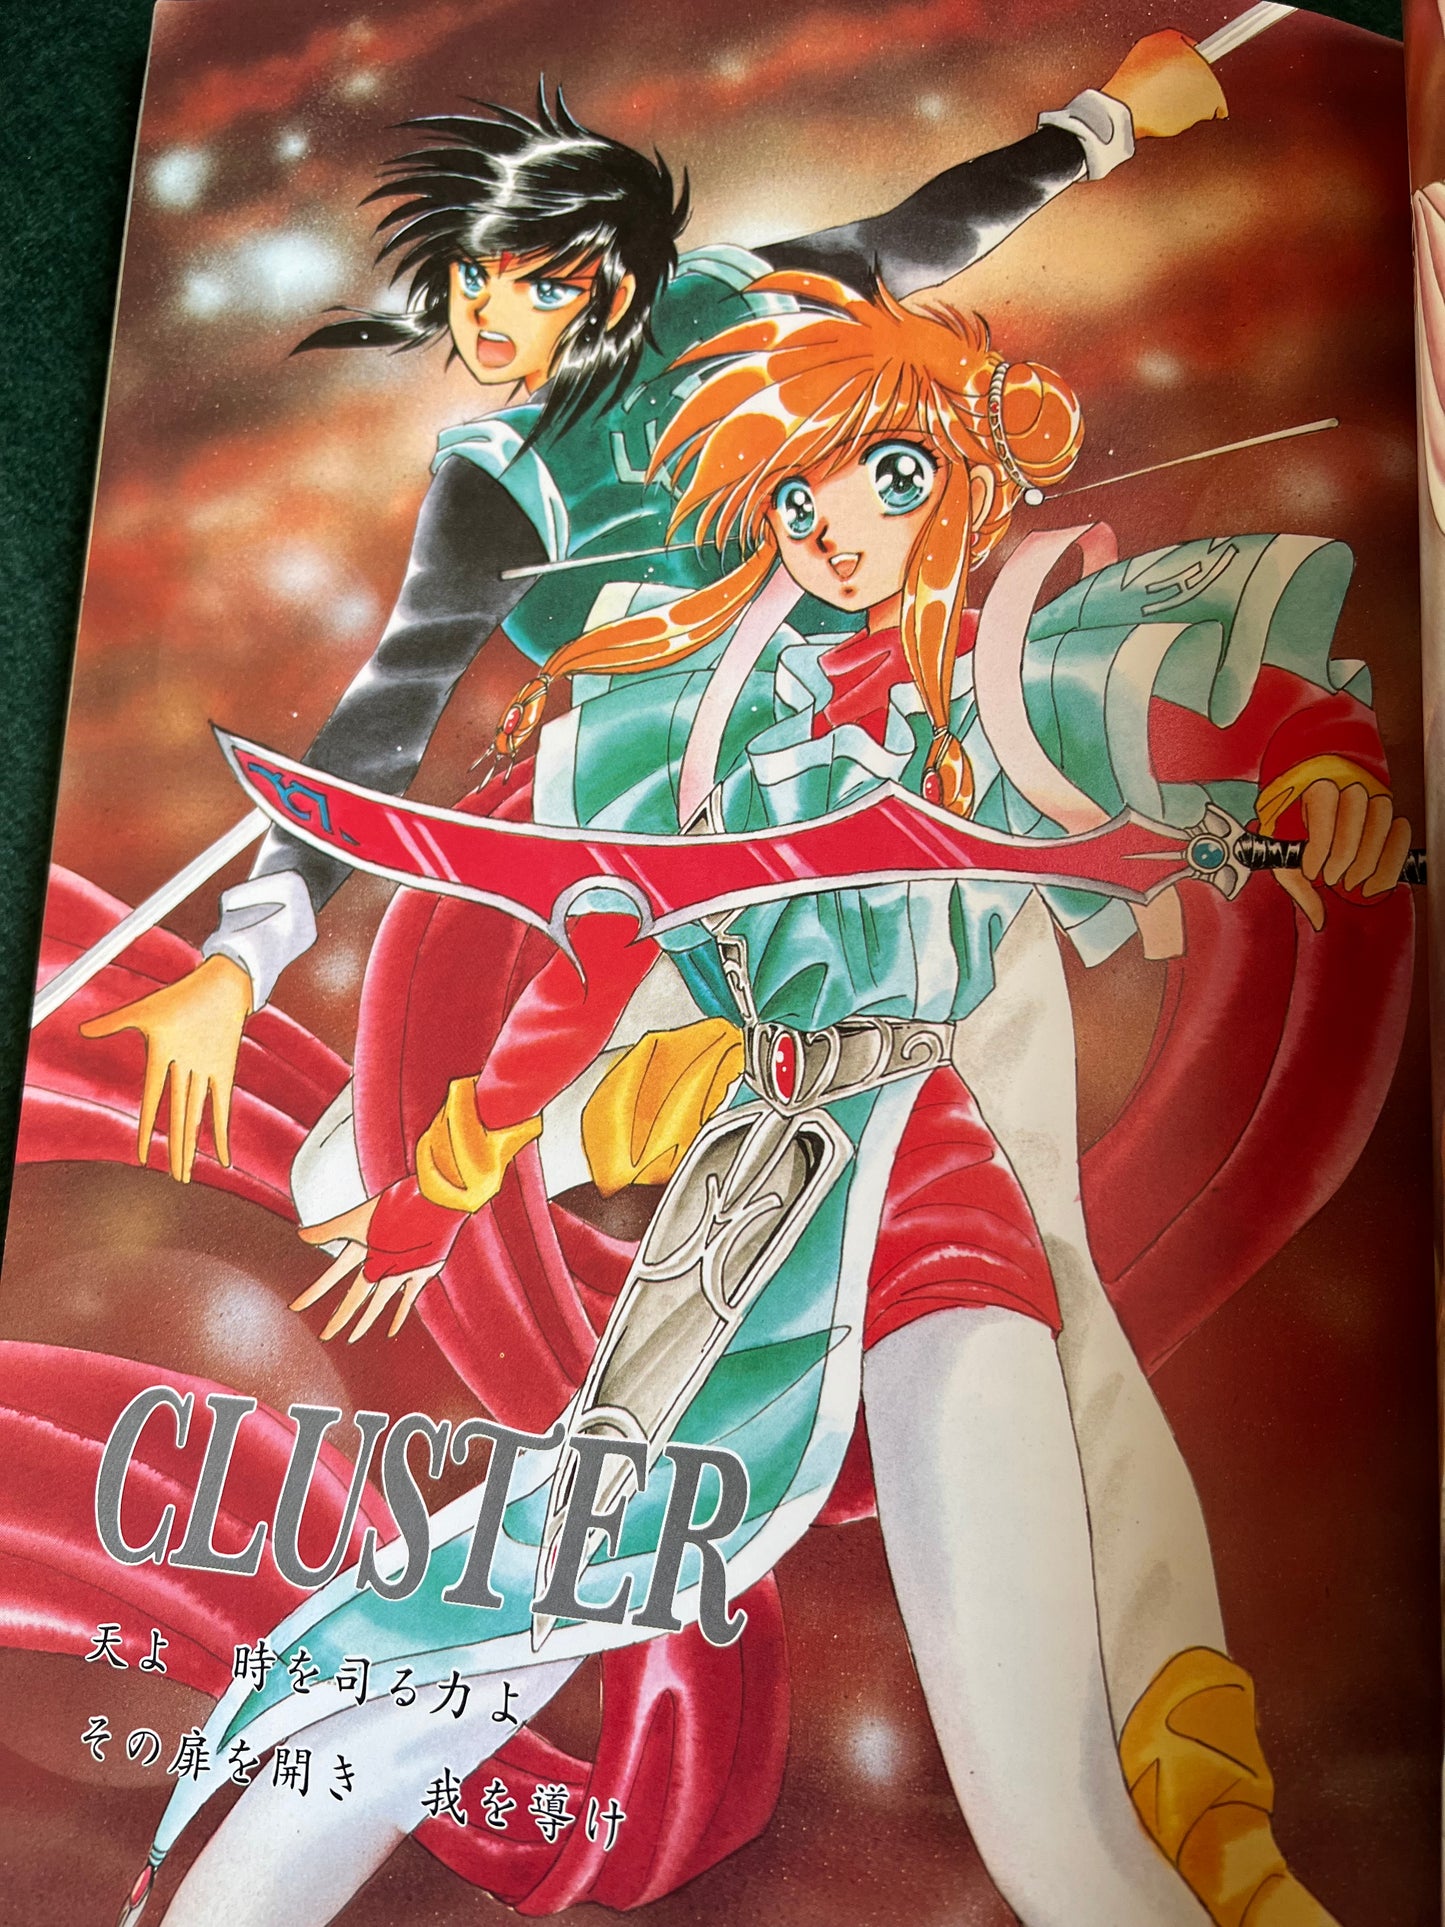 Cluster Artbook by Studio Clamp